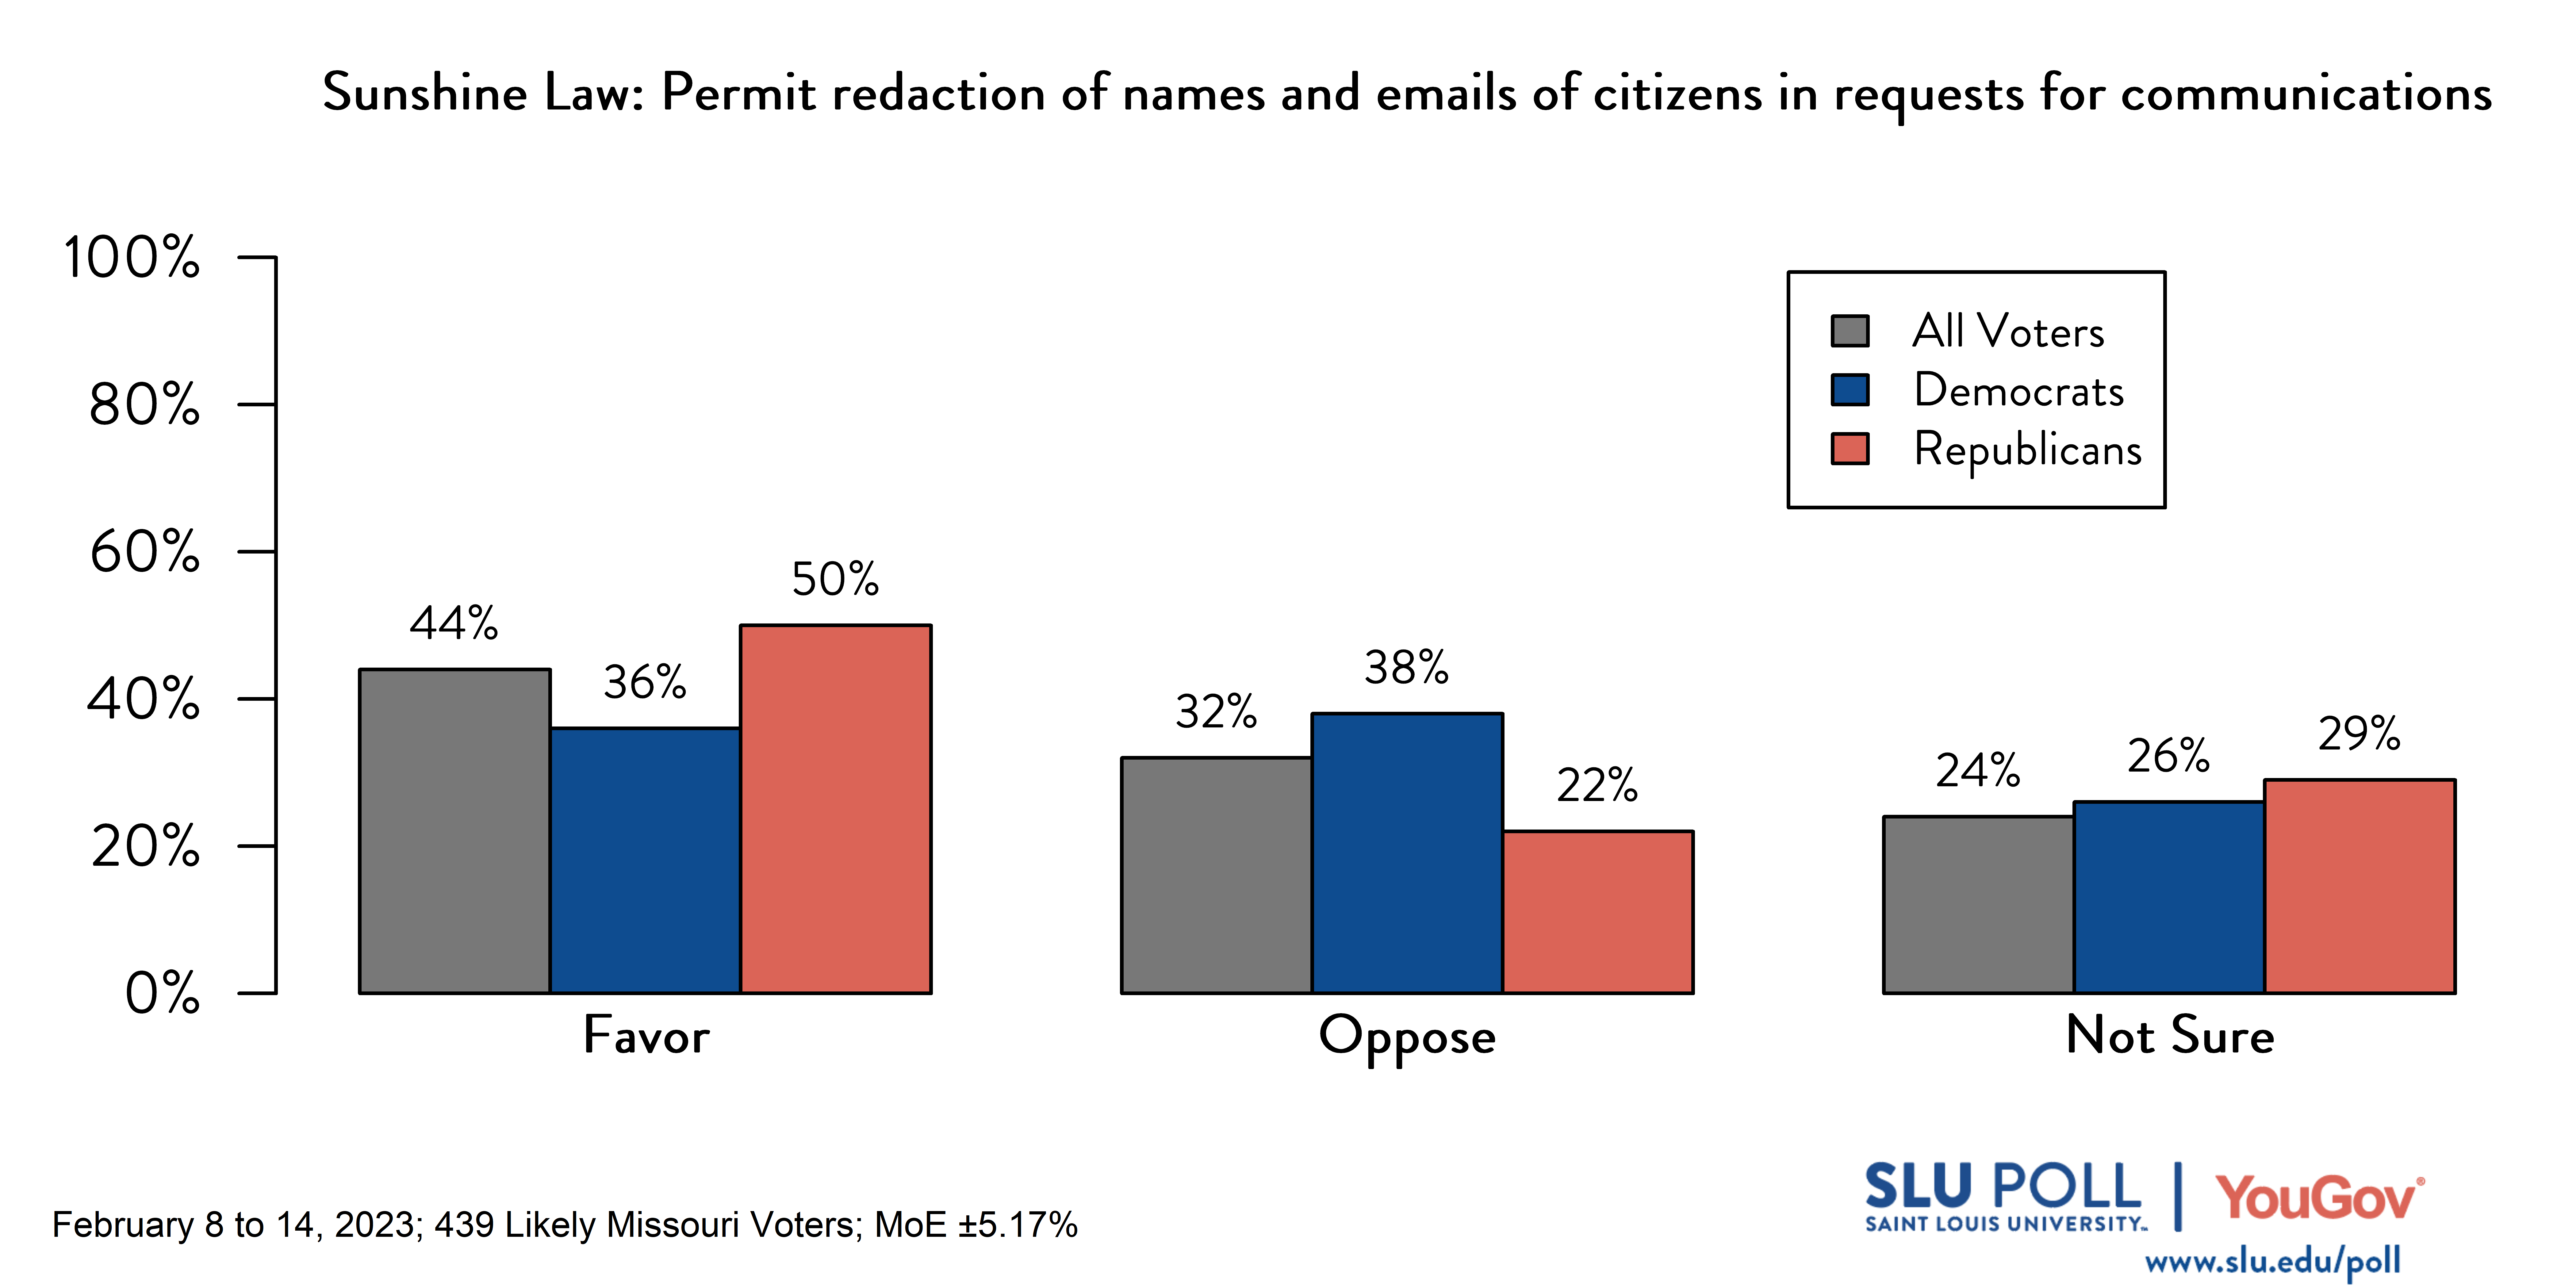 Likely voters' responses to 'Missouri's Sunshine Act allows the public to make requests for government documents (e.g., meeting records or public officials' communications). Do you favor or oppose the following changes to Sunshine Act: Permit redaction of names and emails of citizens in requests for communications (e.g., emails between a public official and citizen)?': 44% Favor, 32% Oppose, and 24% Not sure. Democratic voters' responses: ' 36% Favor, 38% Oppose, and 26% Not sure. Republican voters' responses: 50% Favor, 22% Oppose, and 29% Not sure.